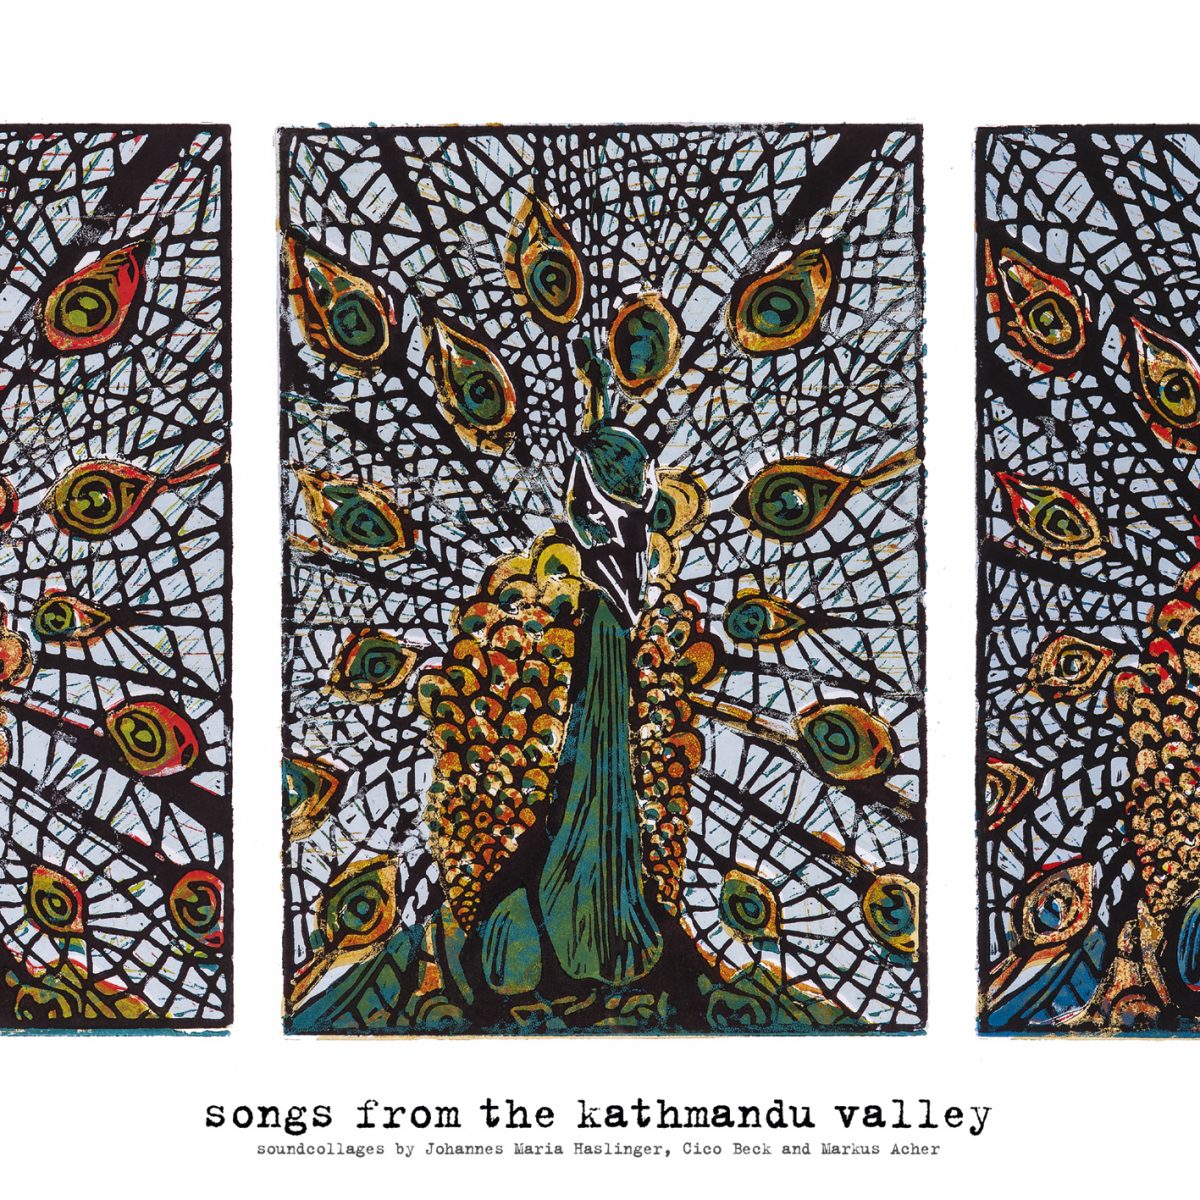 Songs from the kathmandu valley - Soundcollages by Johannes Maria Haslinger, Markus Acher and Cico Beck